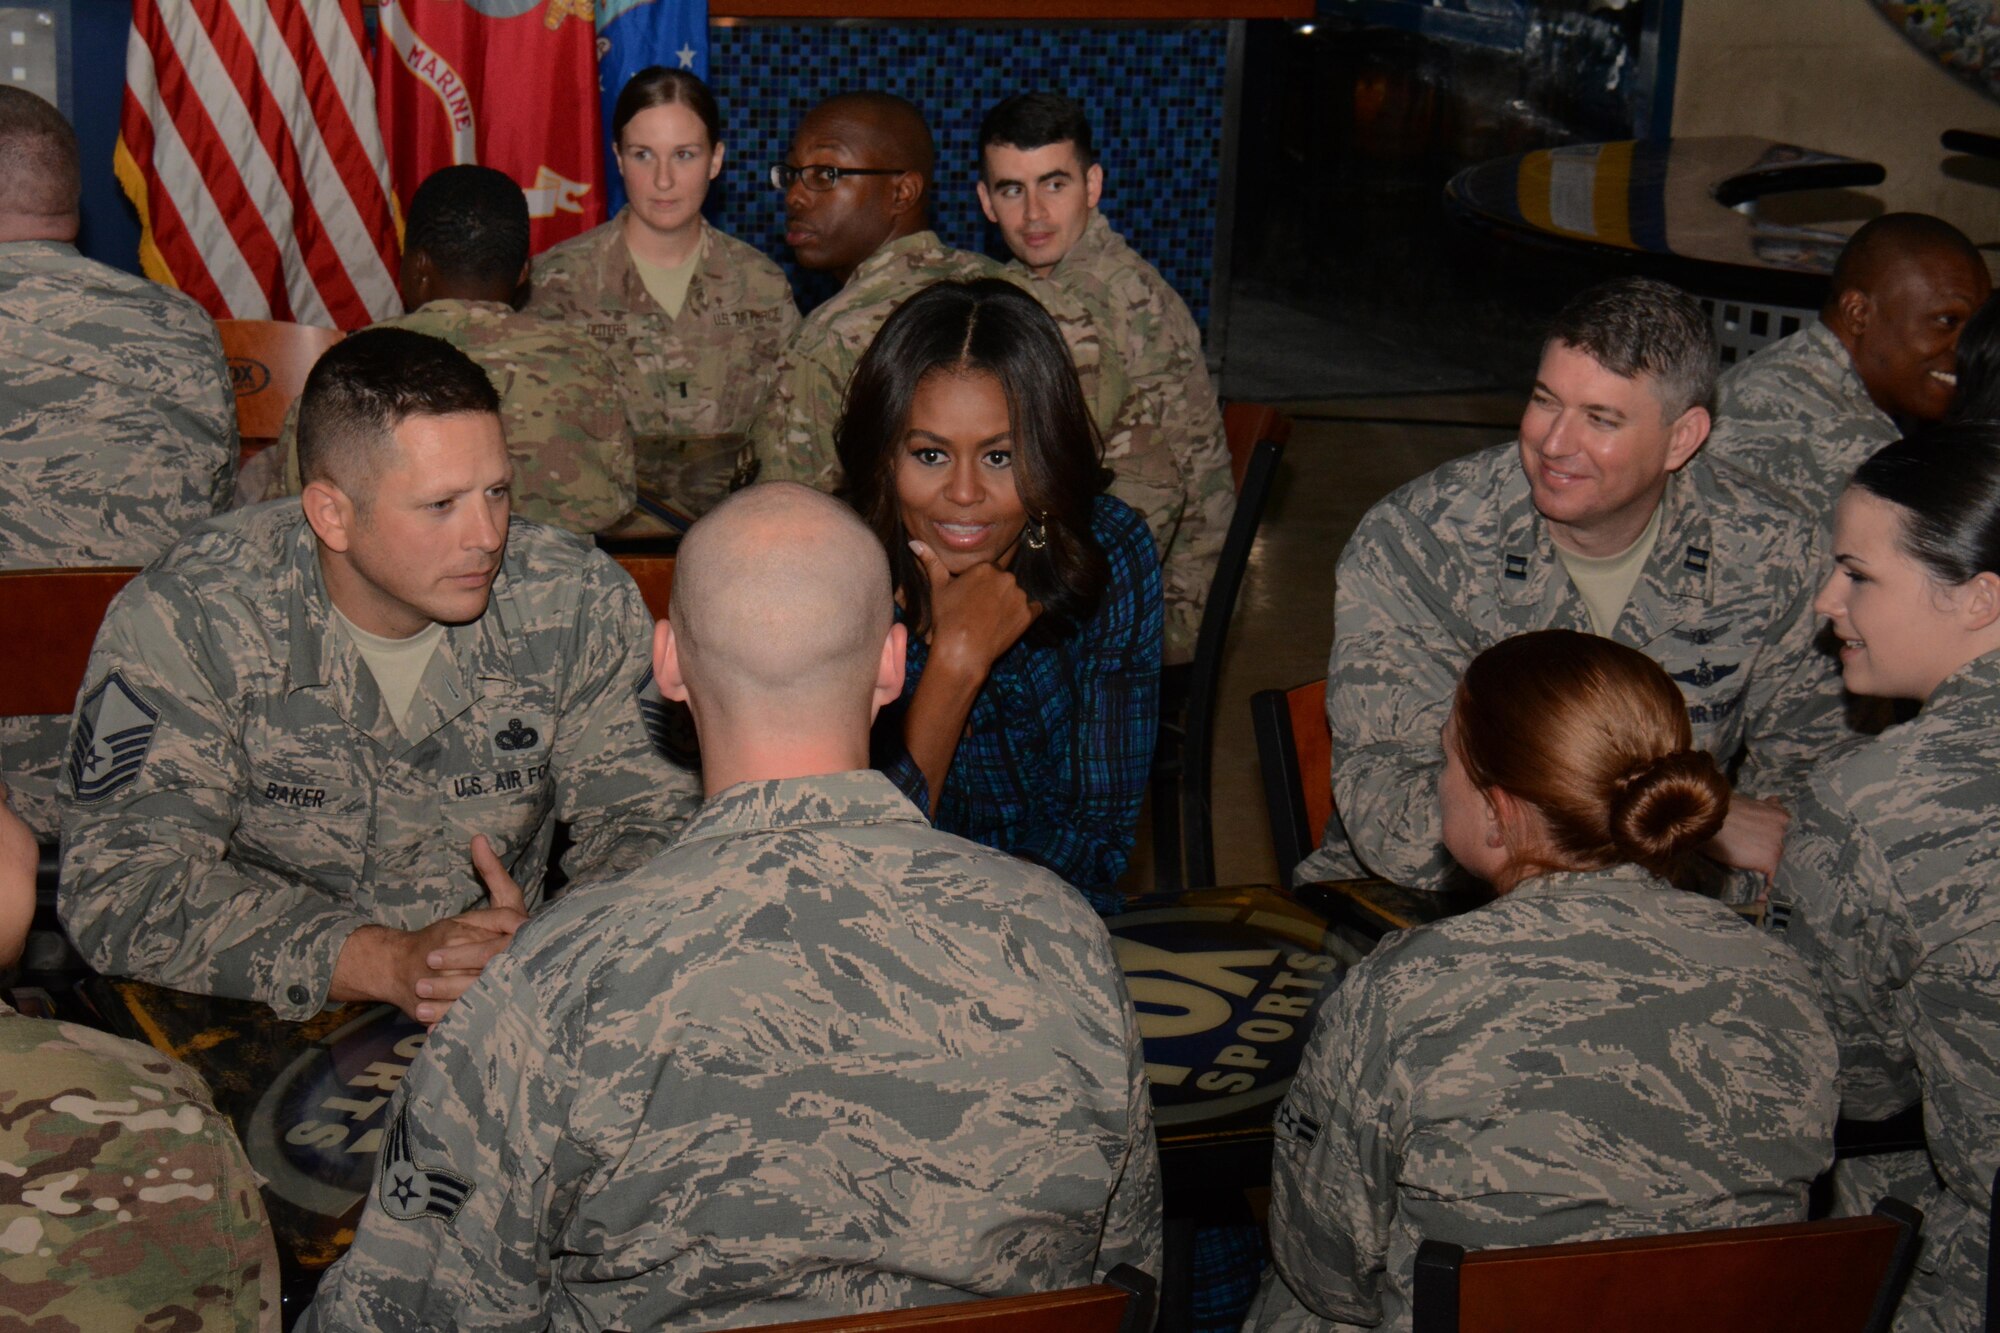 The first lady of the United States, Michelle Obama meets with service members inside the Fox Skybox at Al Udeid Air Base, Qatar Nov. 3. Obama said she is very proud of the hard work America’s military men and women do. “You’re the ones doing the tough work, without complaint and you’re representing our nation. I‘ve always been in awe of our military service members, our veterans and their families. Thank you, we love you,” she said.  (U.S. Air Force photo by Tech. Sgt. James Hodgman) 